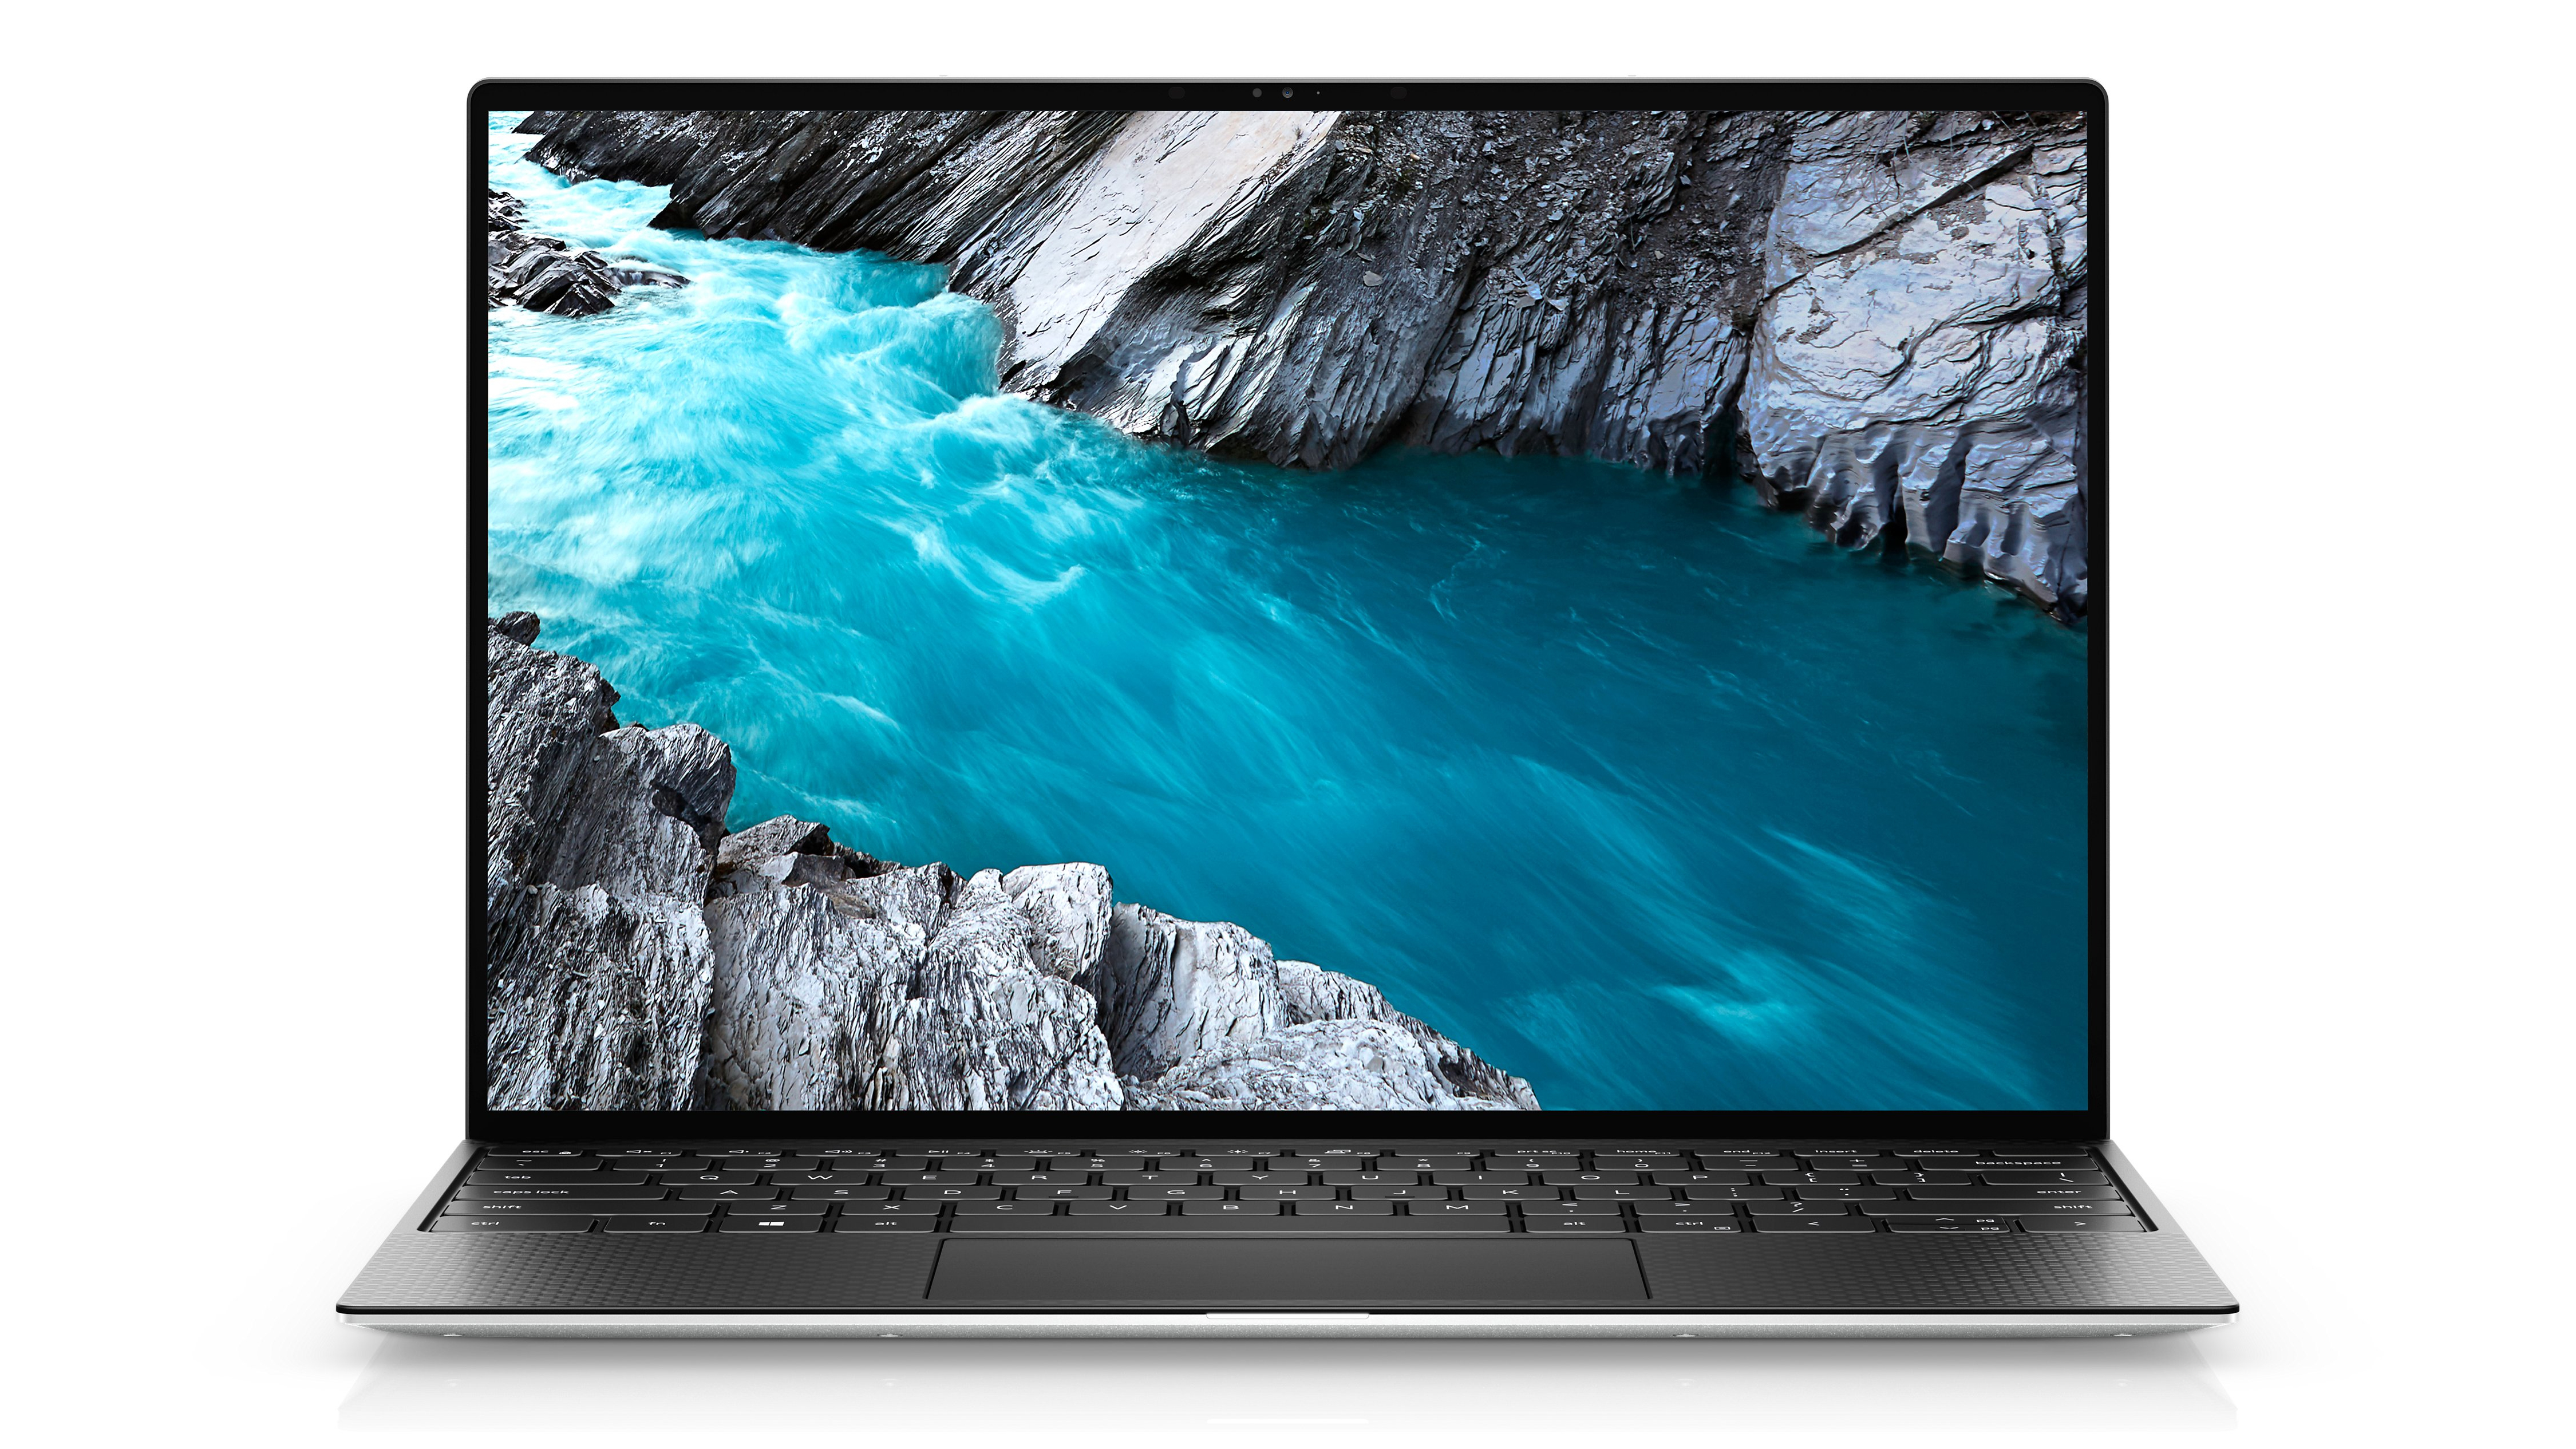 Image of the Dell XPS 13 (Late 2020) laptop